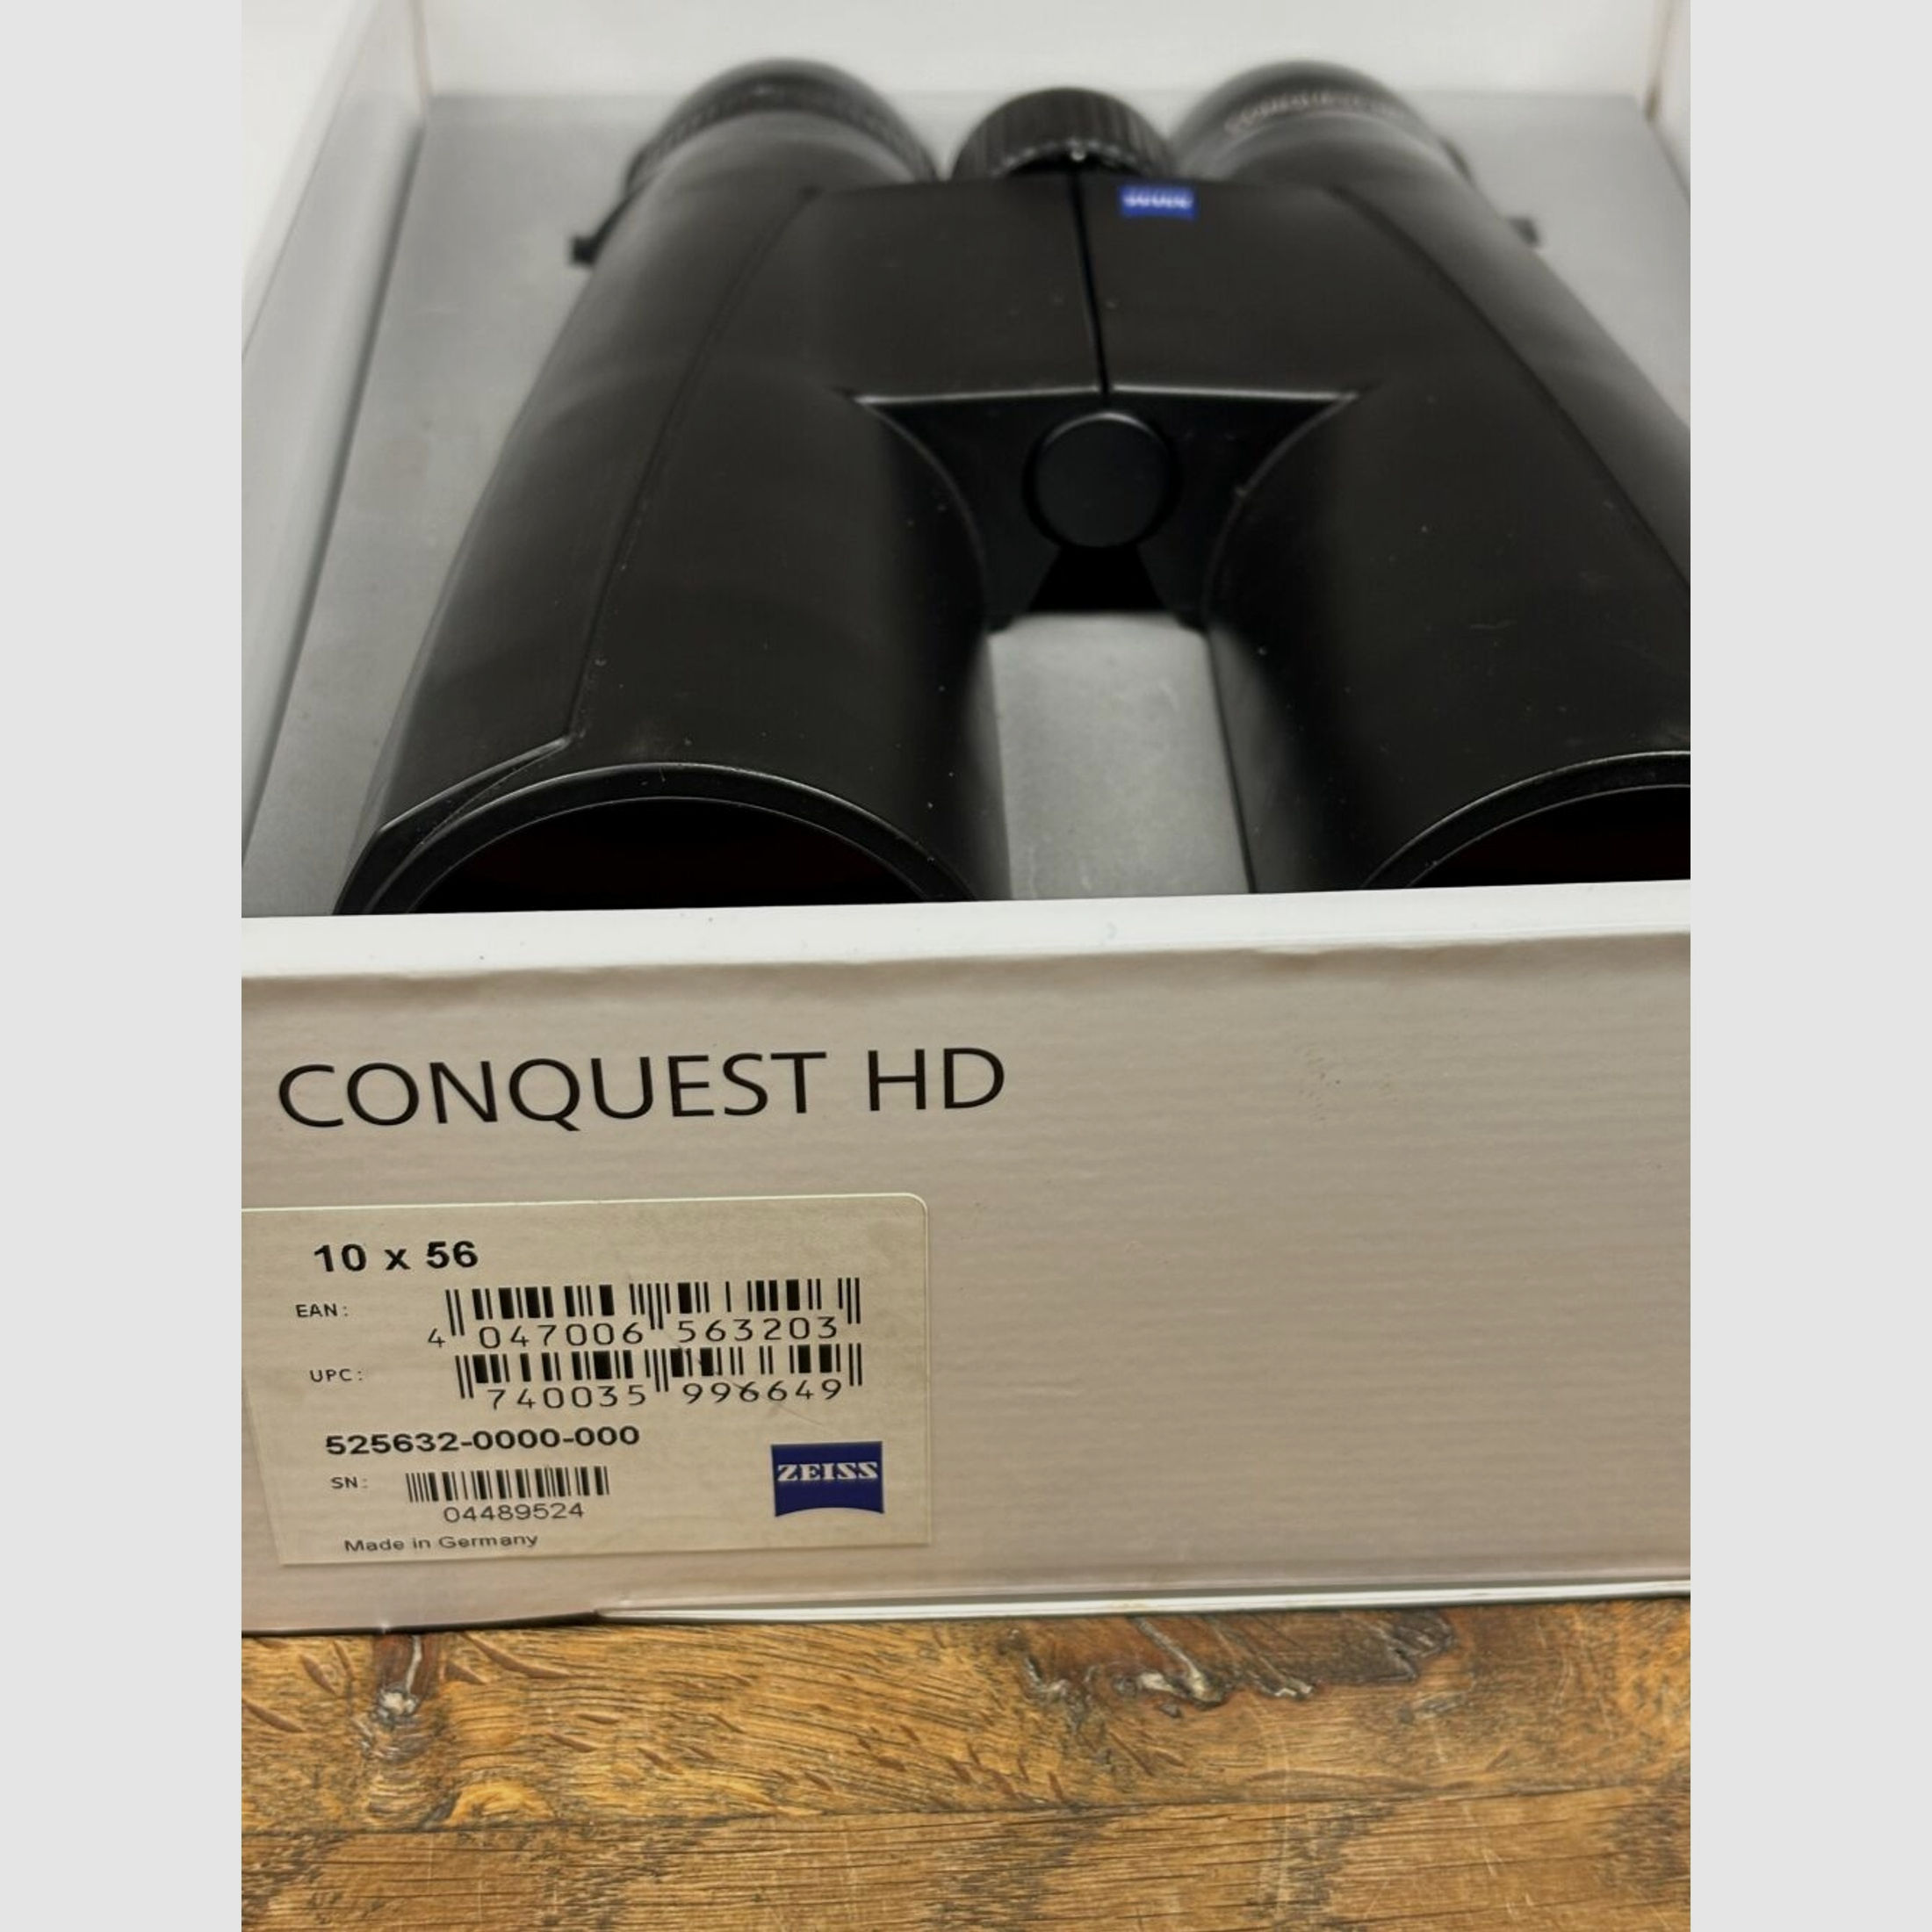 zeiss	 Conquest 10x56